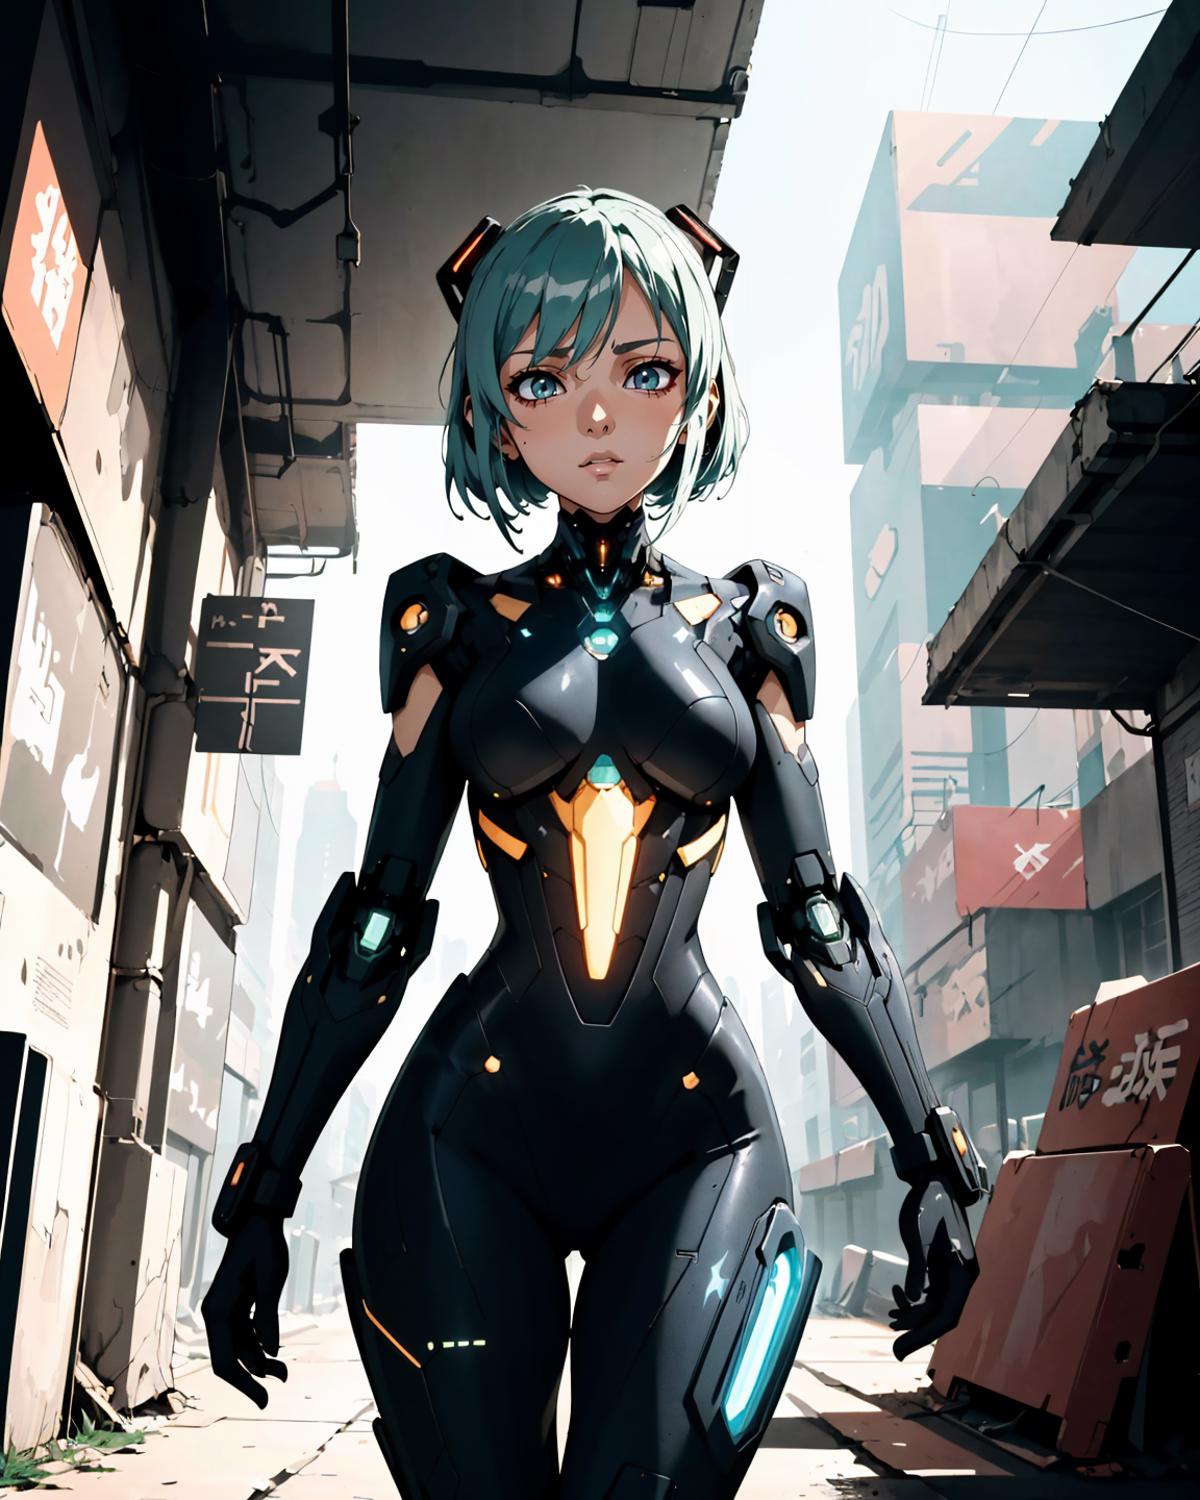 A blue-haired woman in a futuristic outfit stands in a city.